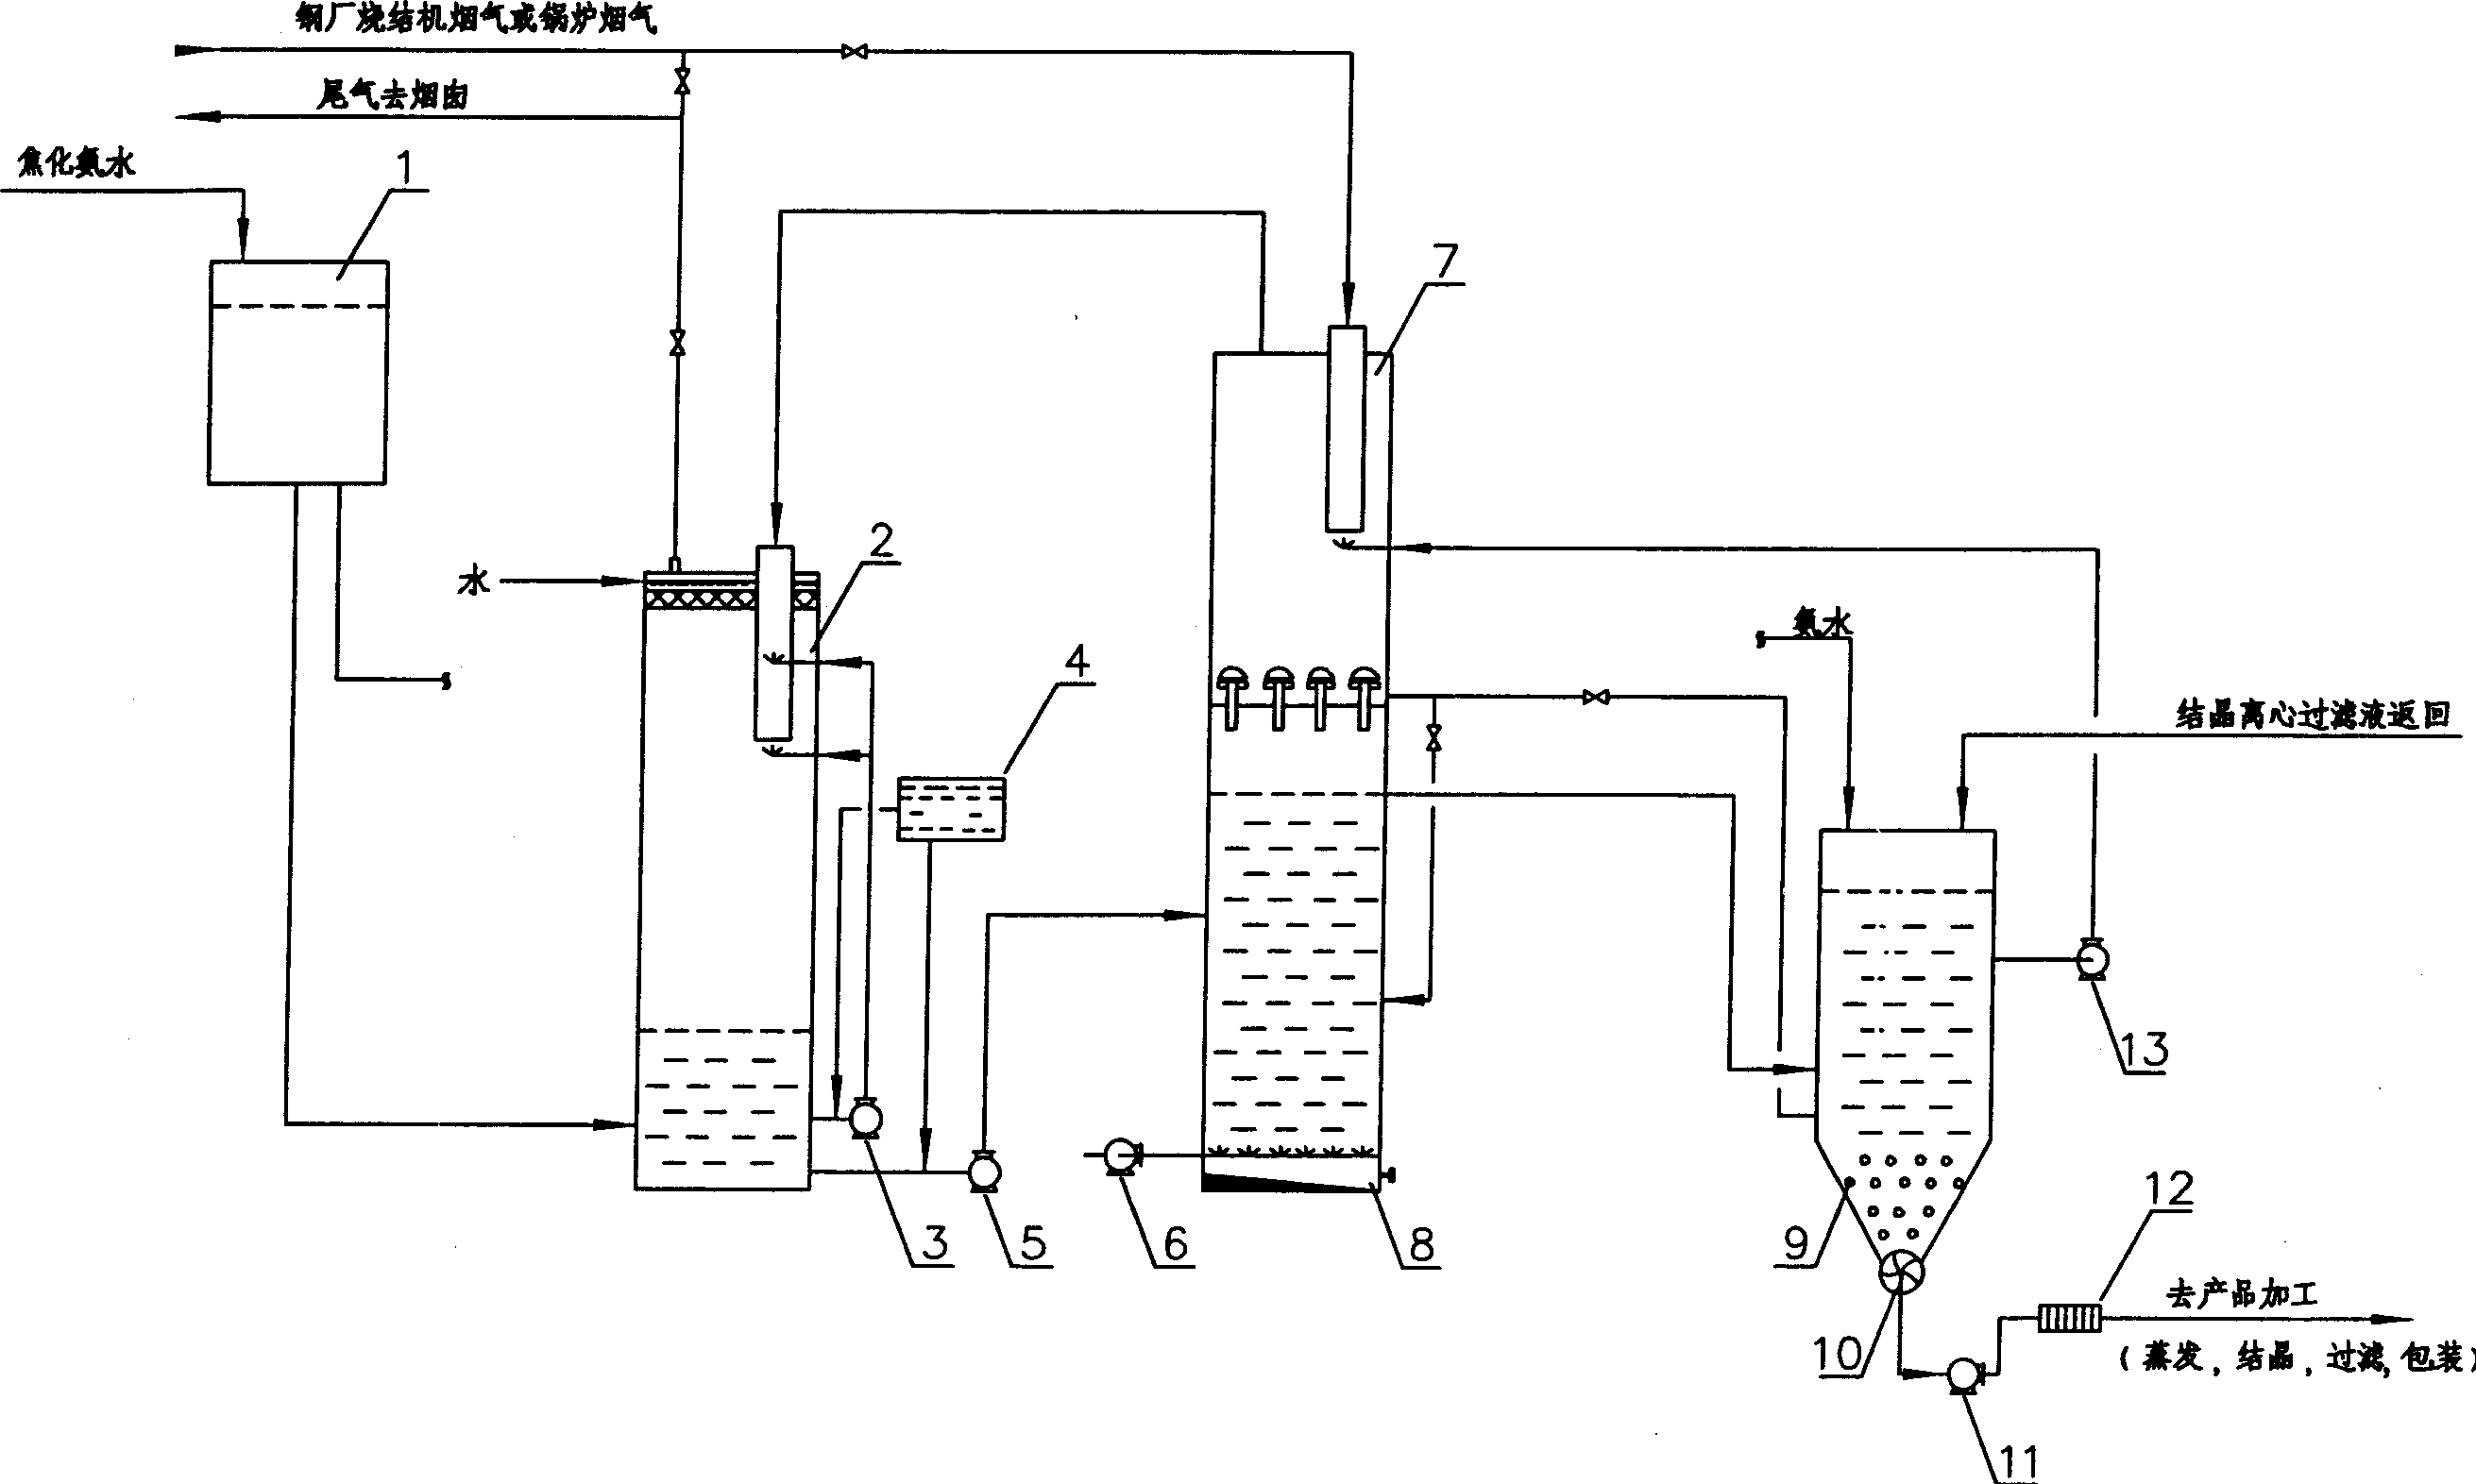 Process and apparatus for eliminating fume SO2 from waste coking ammonia water of iron and steel and coal chemical enterprise